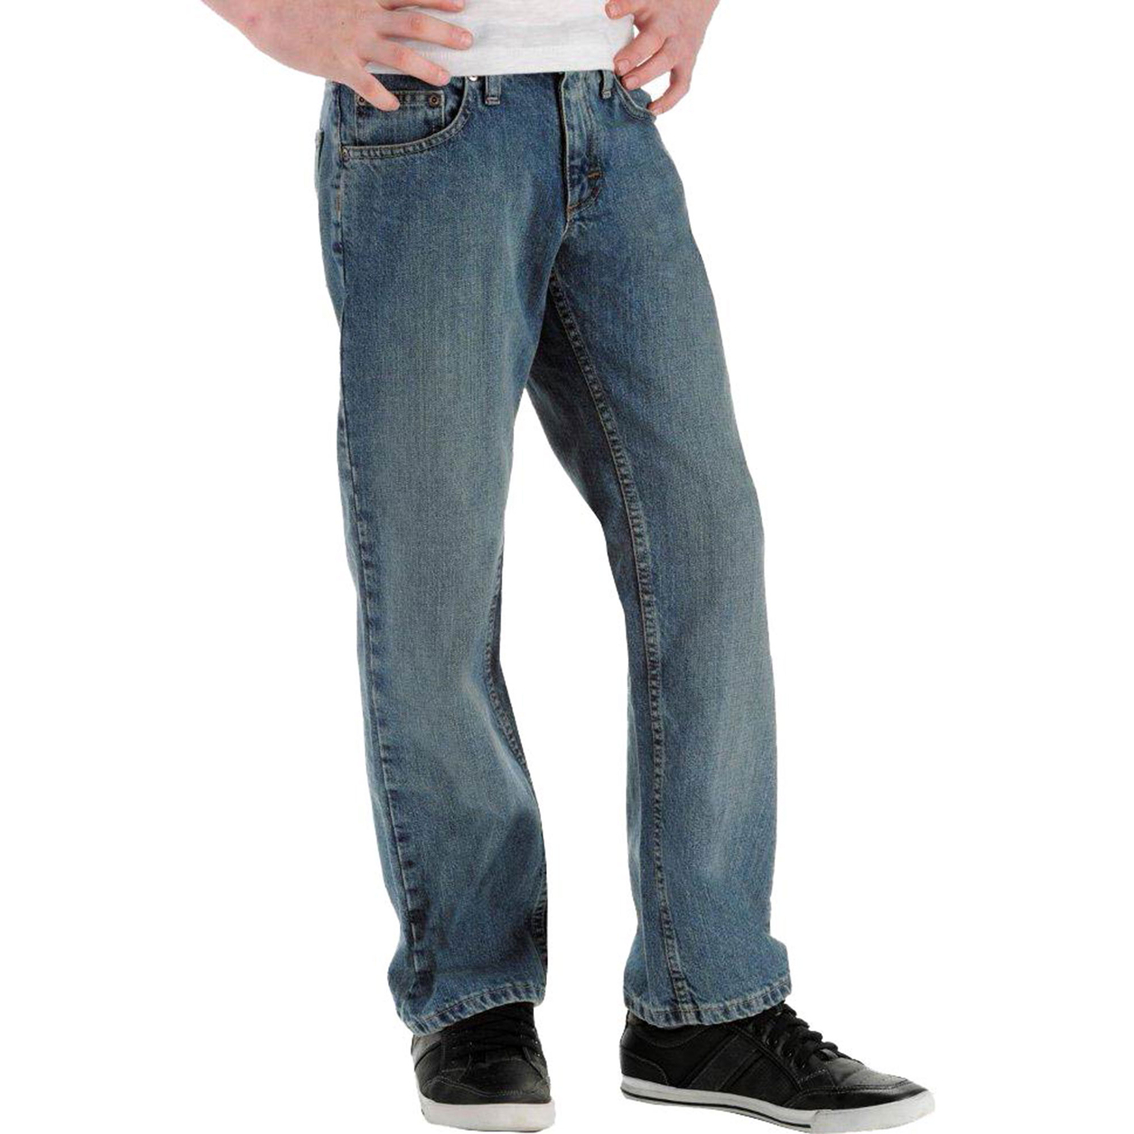 Lee Boys Premium Select Relaxed Fit Jeans | Boys 8-20 | Clothing ...